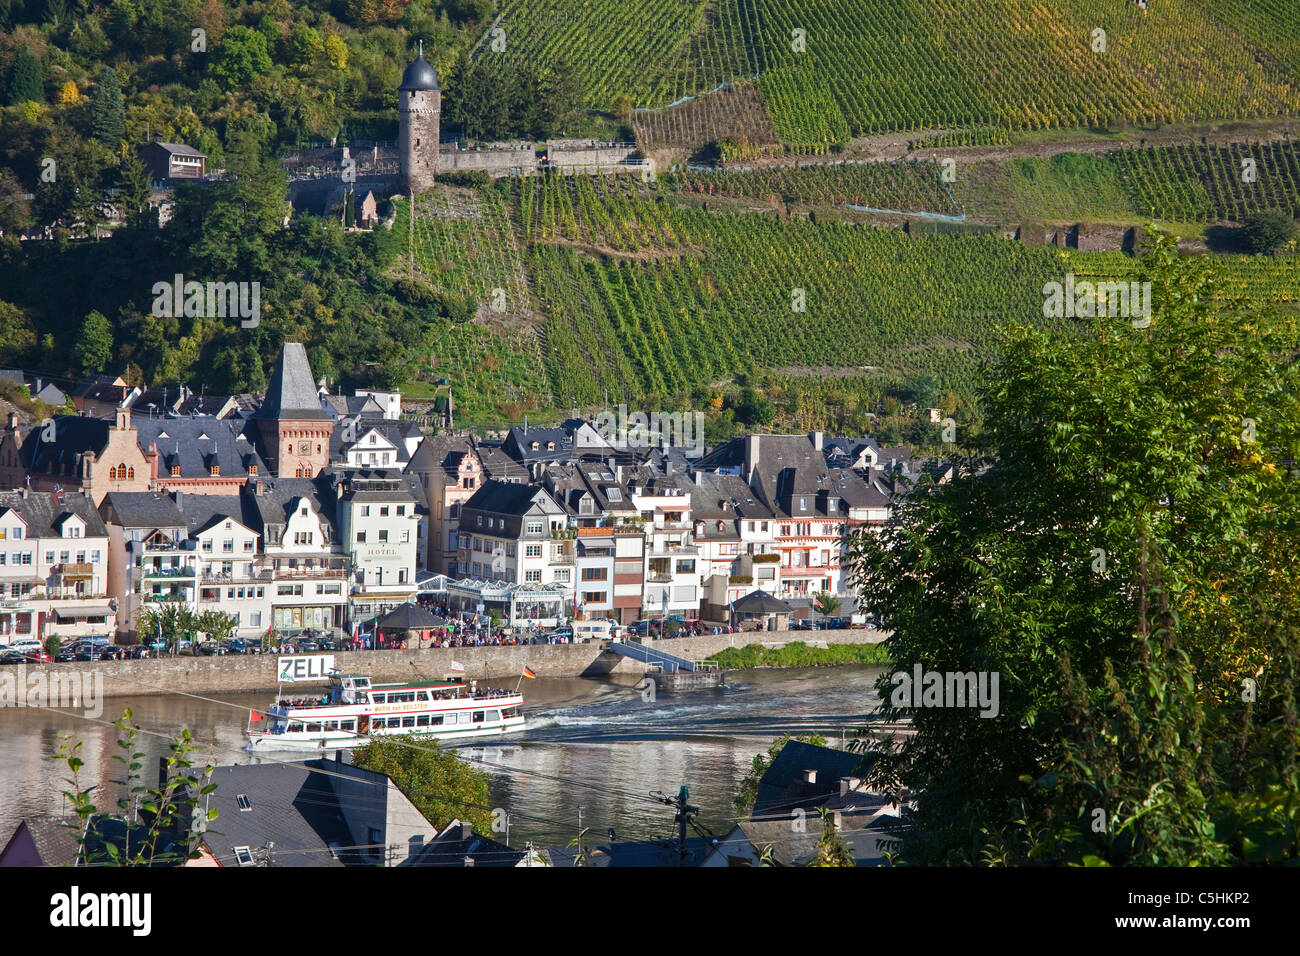 Zell an der Mosel und der runde Turm, the village Zell with the round tower, Moselle Stock Photo